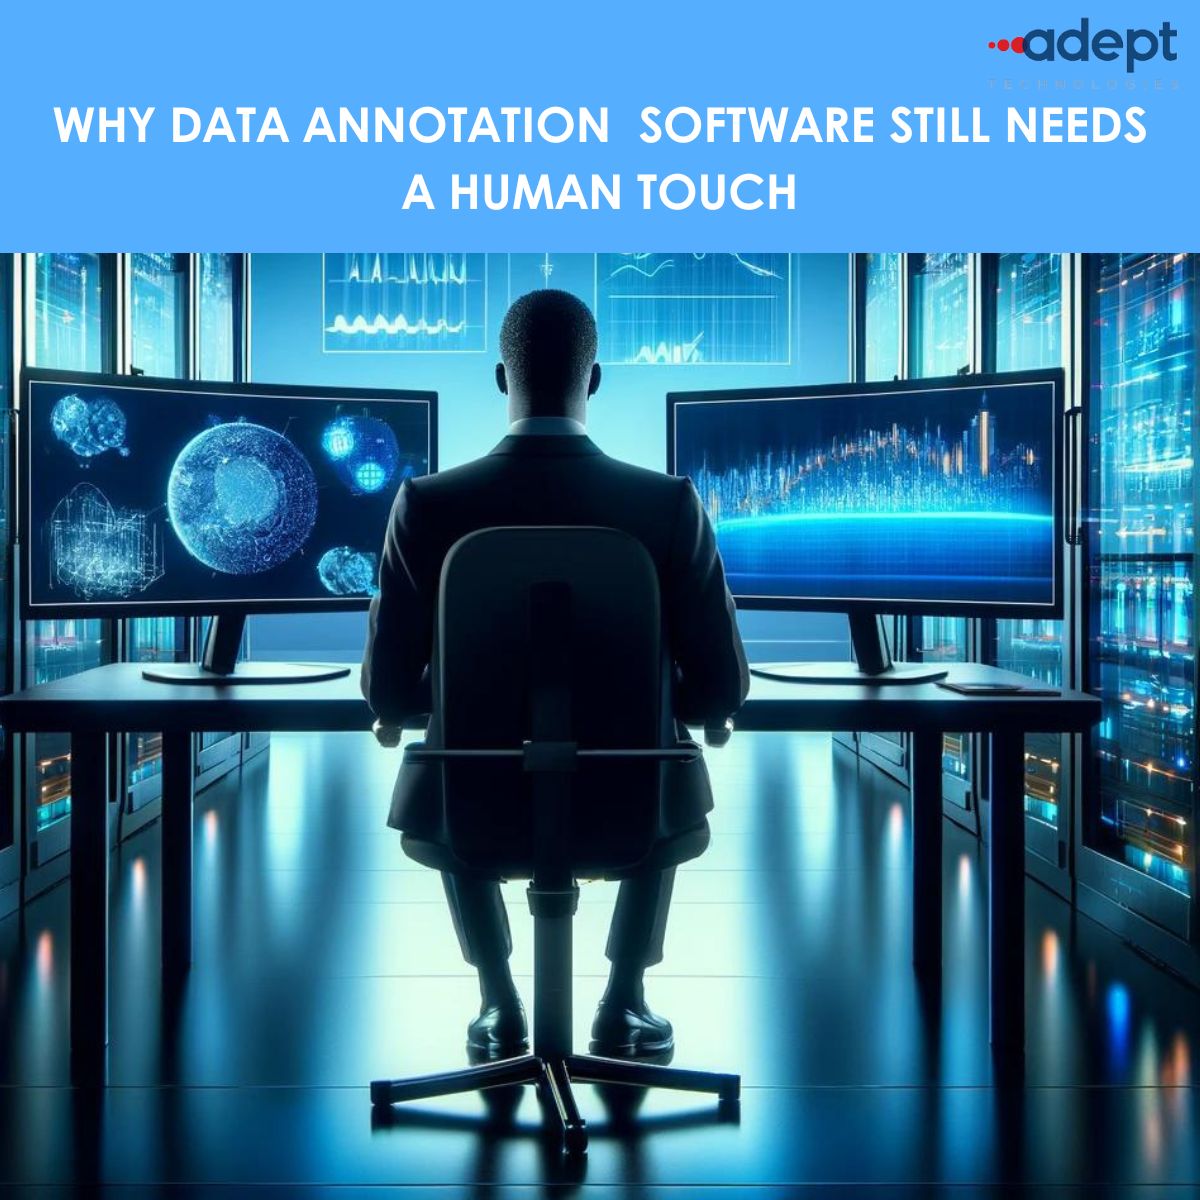 Here's why data annotation software still needs a human touch. linkedin.com/feed/update/ur…